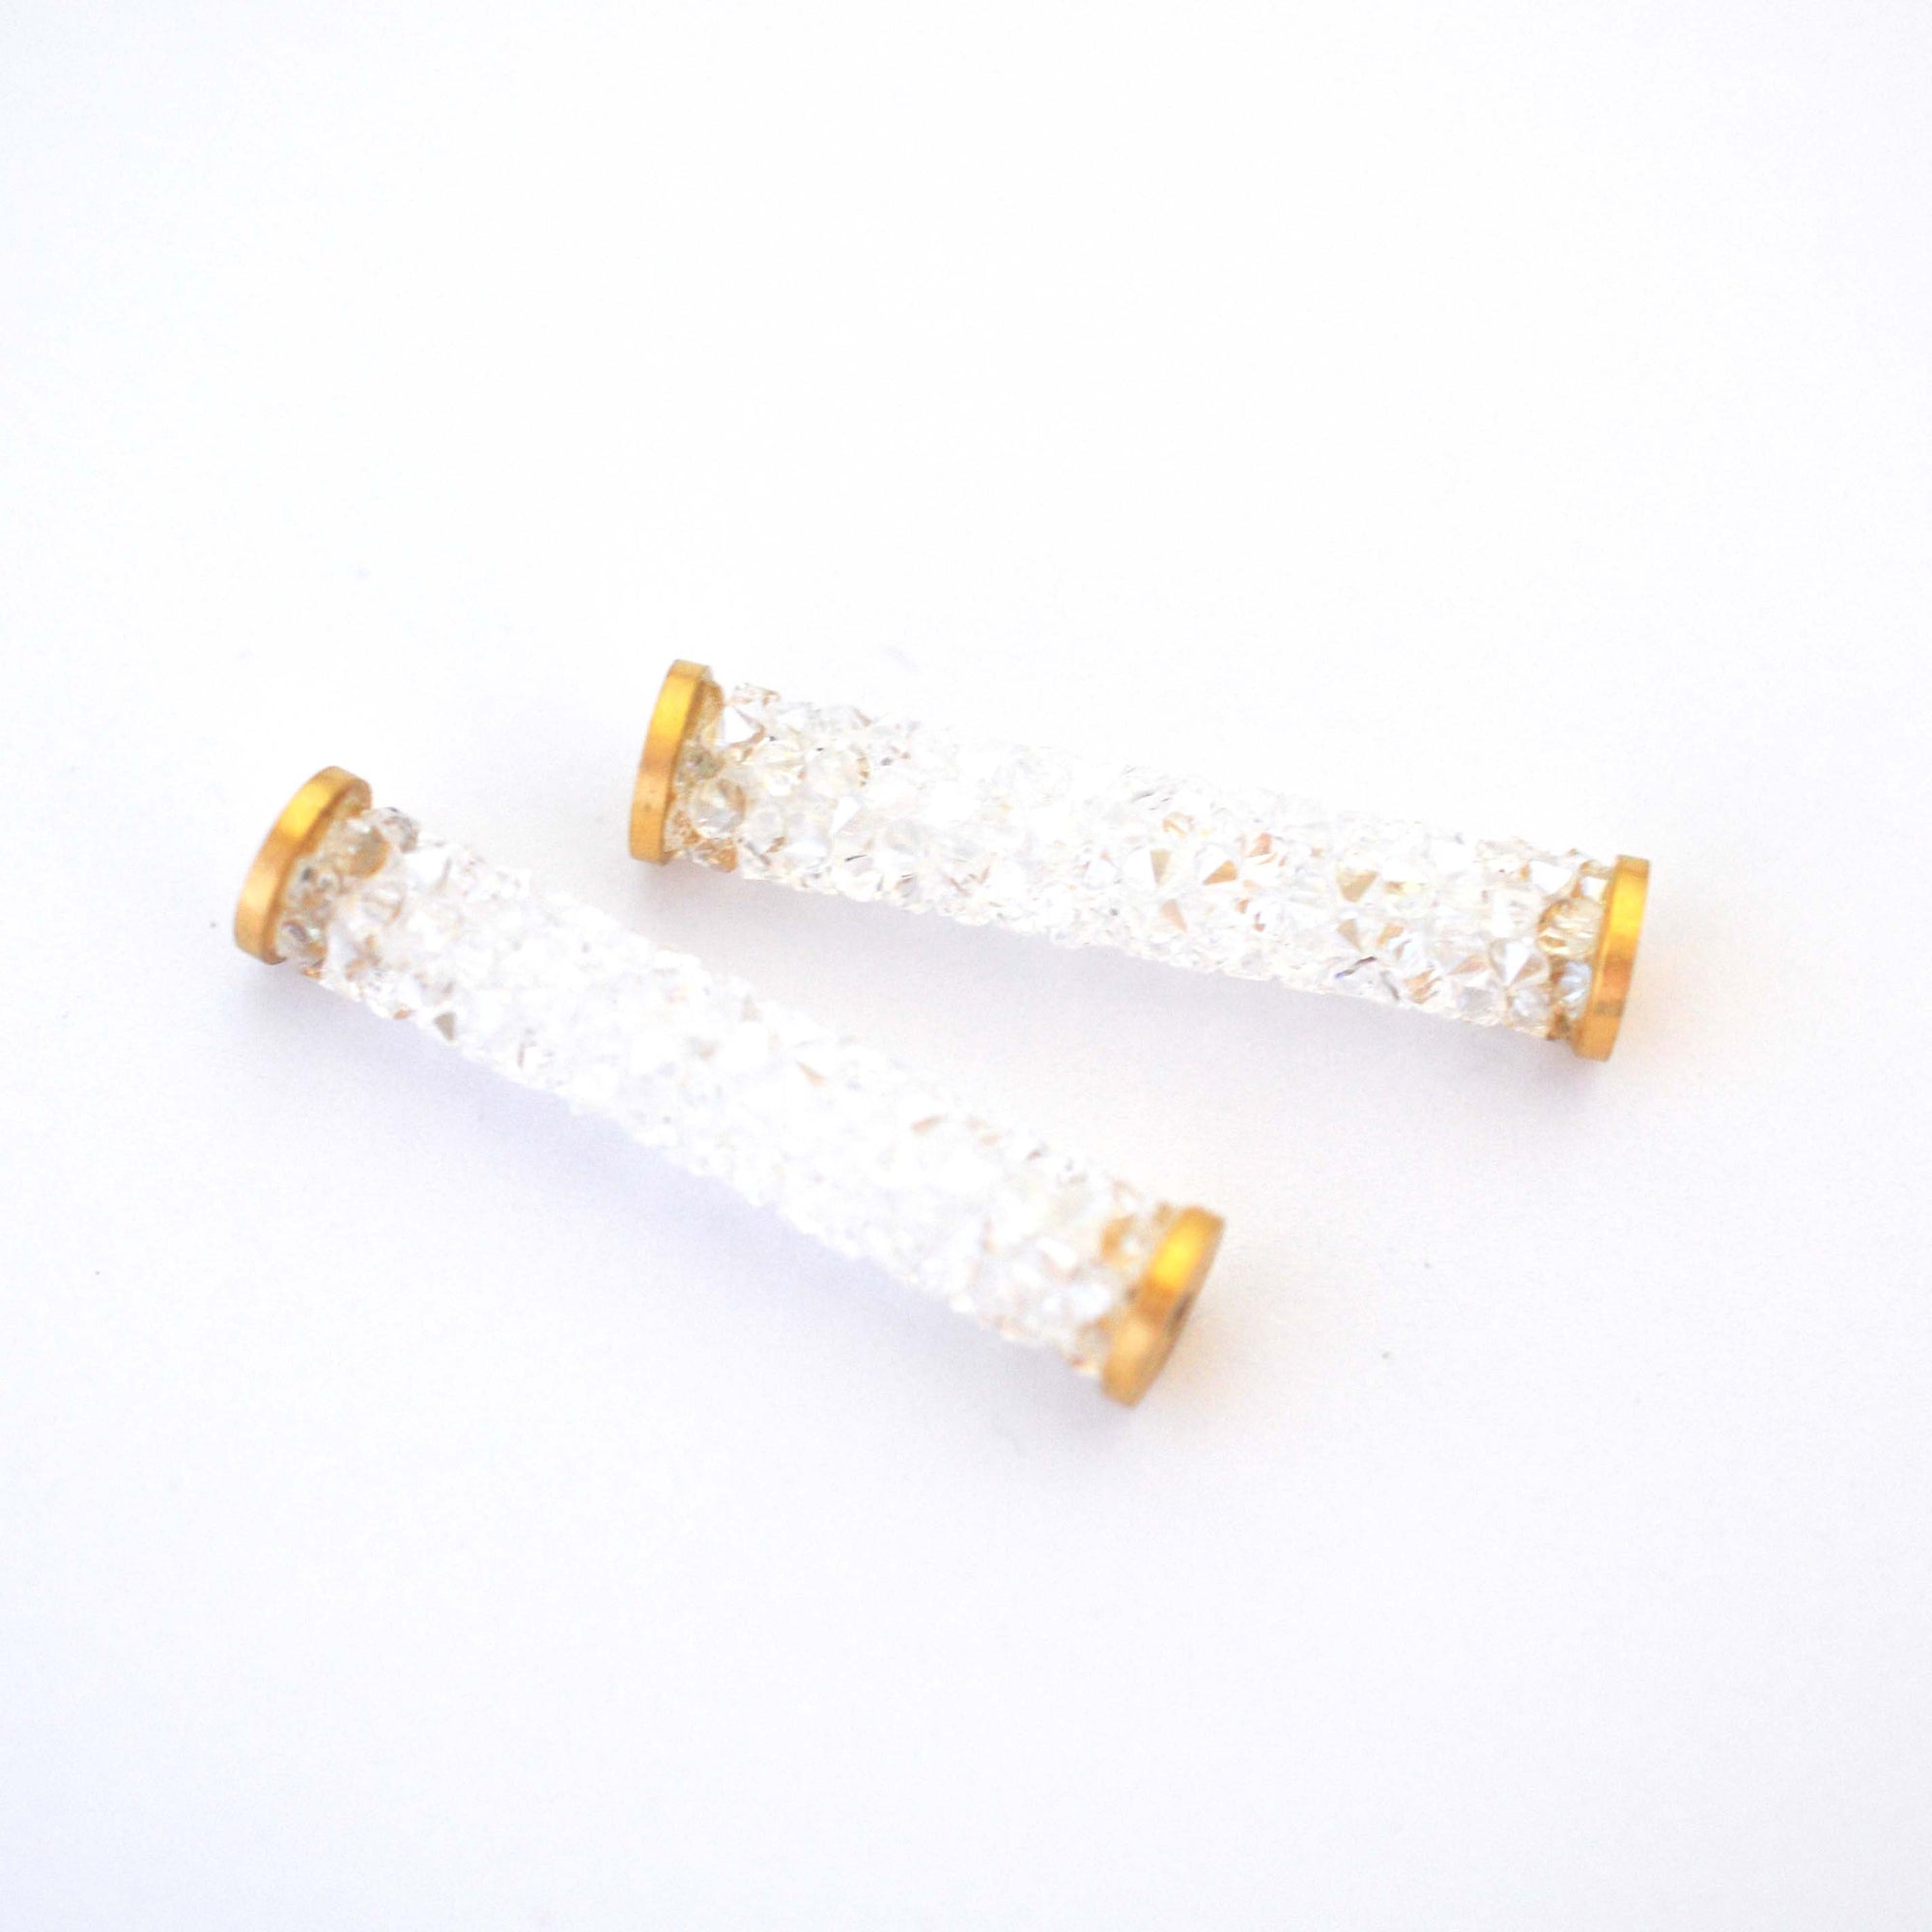 Moonlight W. Gold Plated Accents Fine Rocks Tube Beads Barton Crystal 30MM - 1 Bead